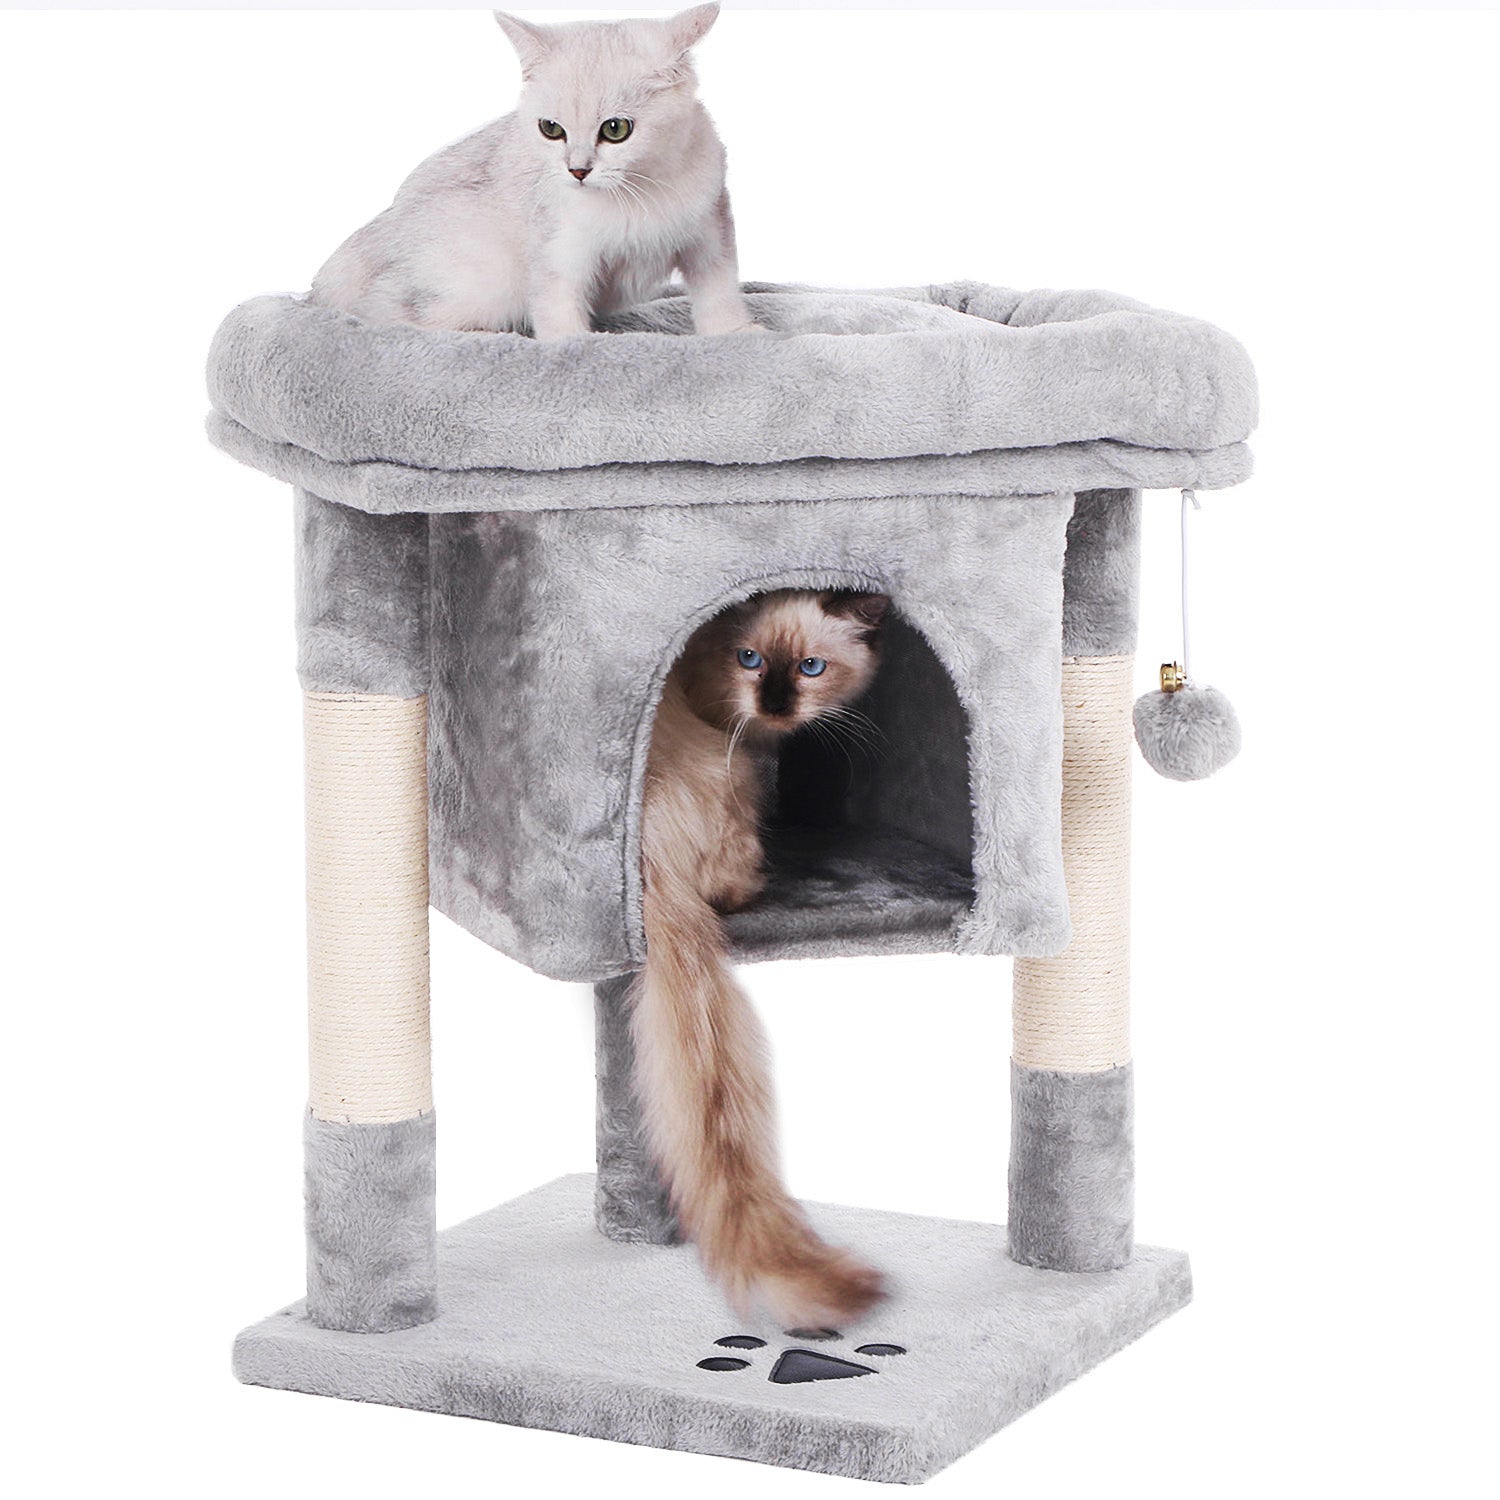 BEWISHOME Cat Tree Cat House Cat Condo with Sisal Scratching Posts, Plush Perch, Cat Tower Furniture Cat Bed Kitty Activity Center Kitten Play House MMJ08B